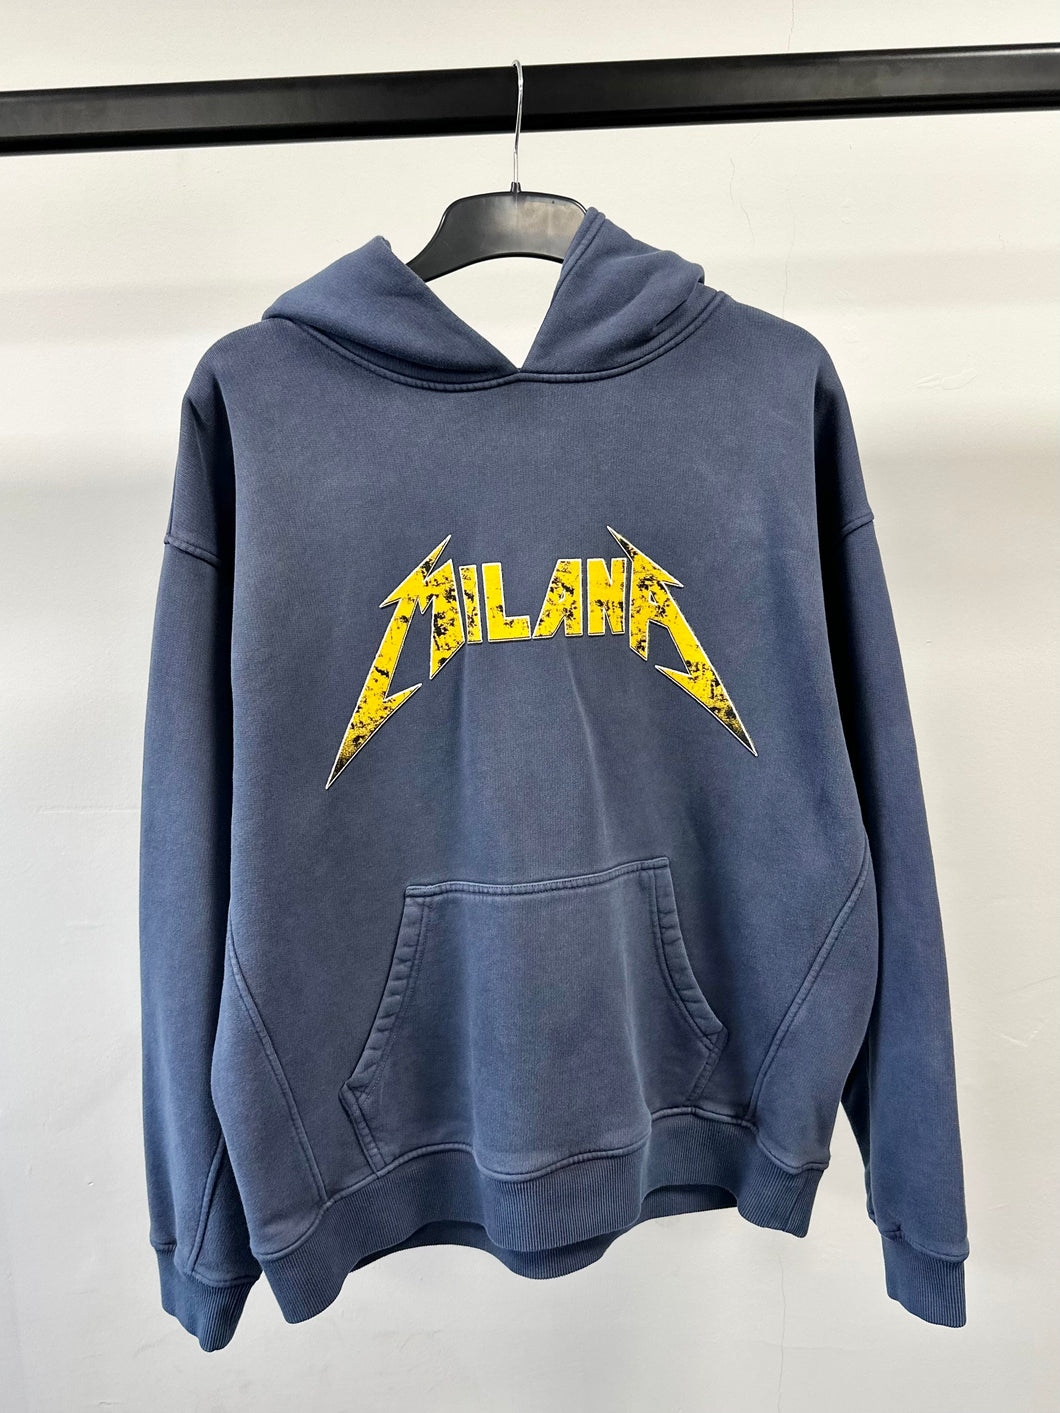 Washed Blue Graphic Heavyweight Hoodie.